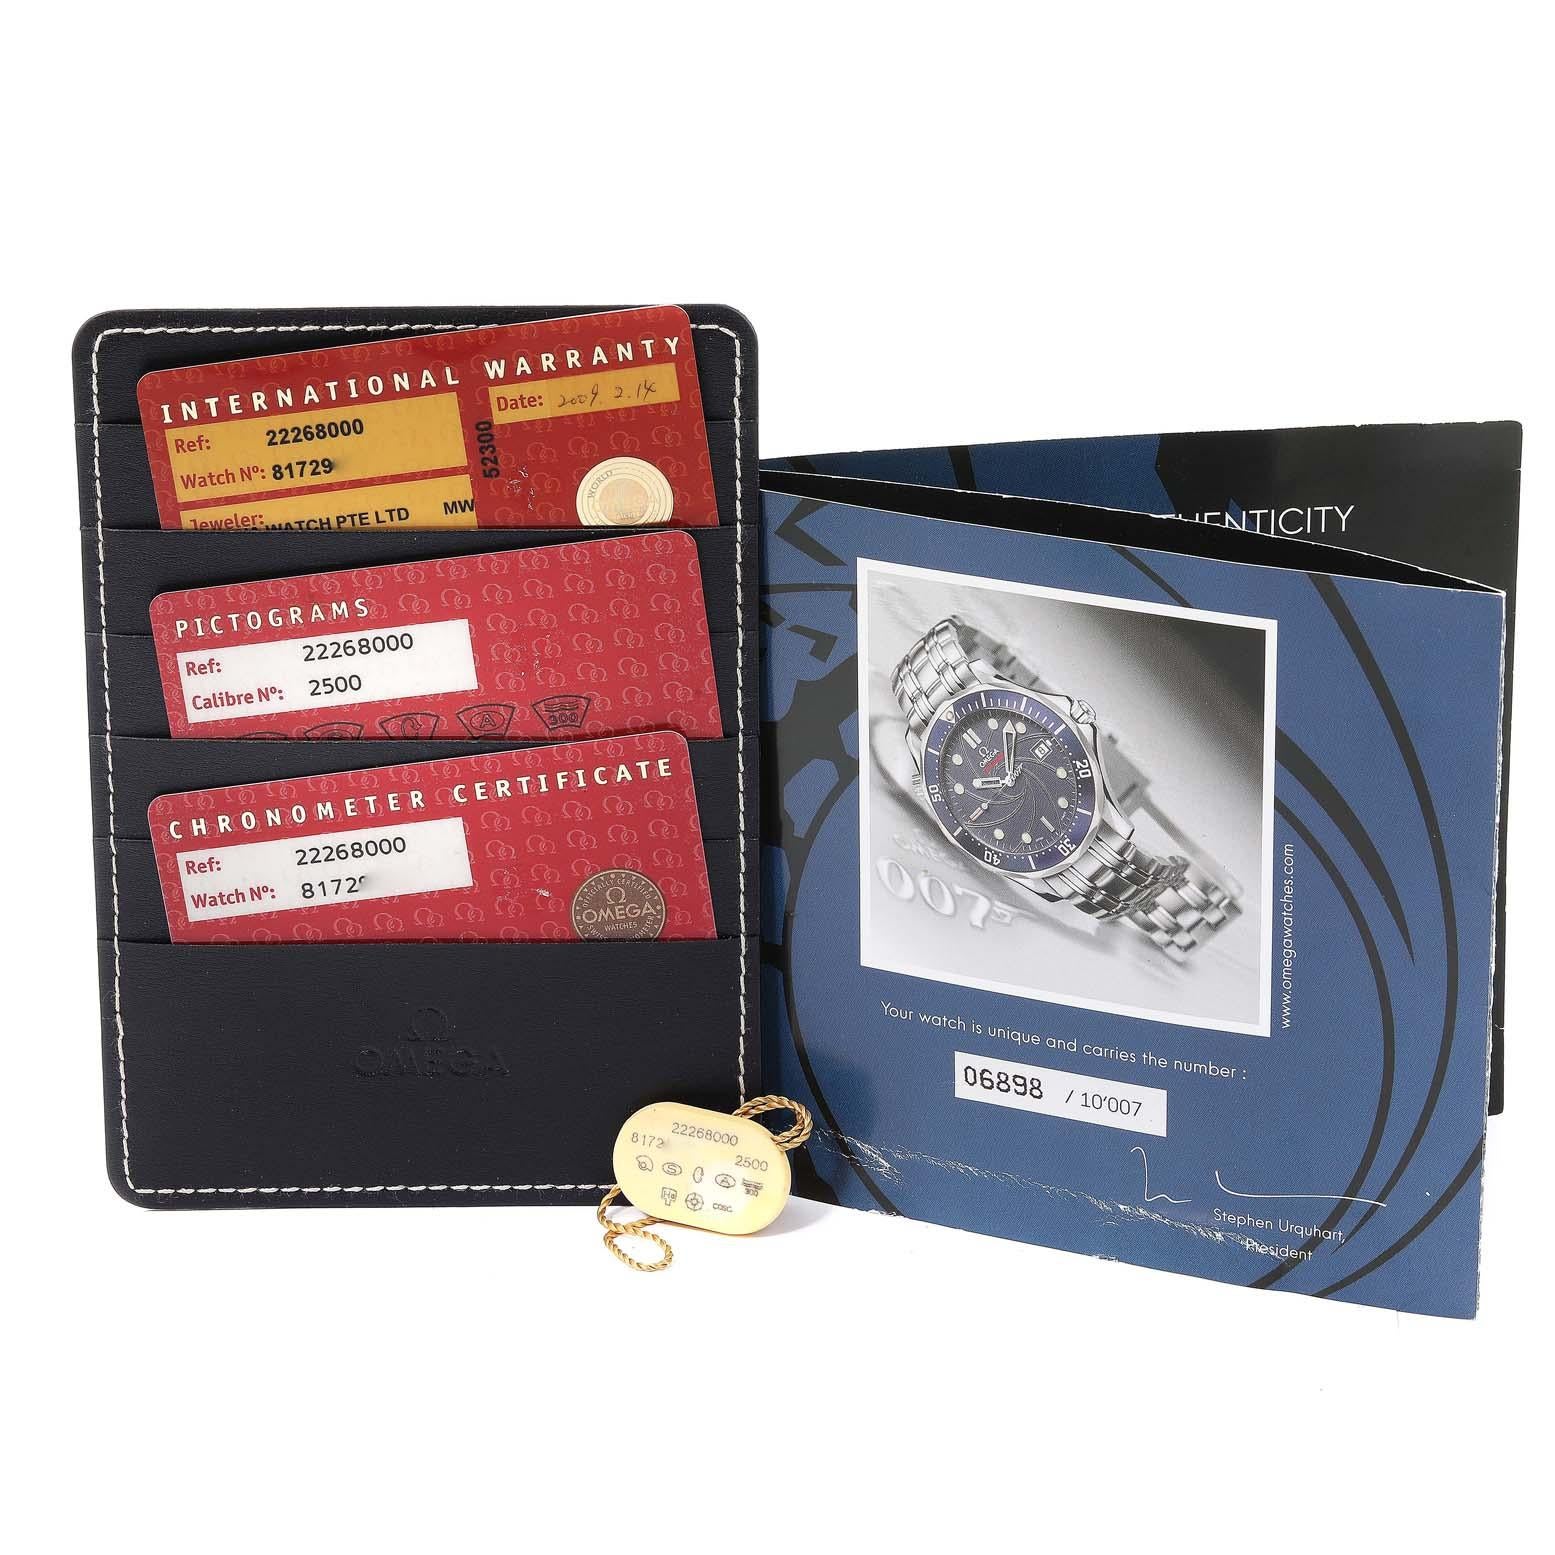 Omega Seamaster Bond 007 Limited Edition Steel Mens Watch 2226.80.00 Box Card For Sale 5